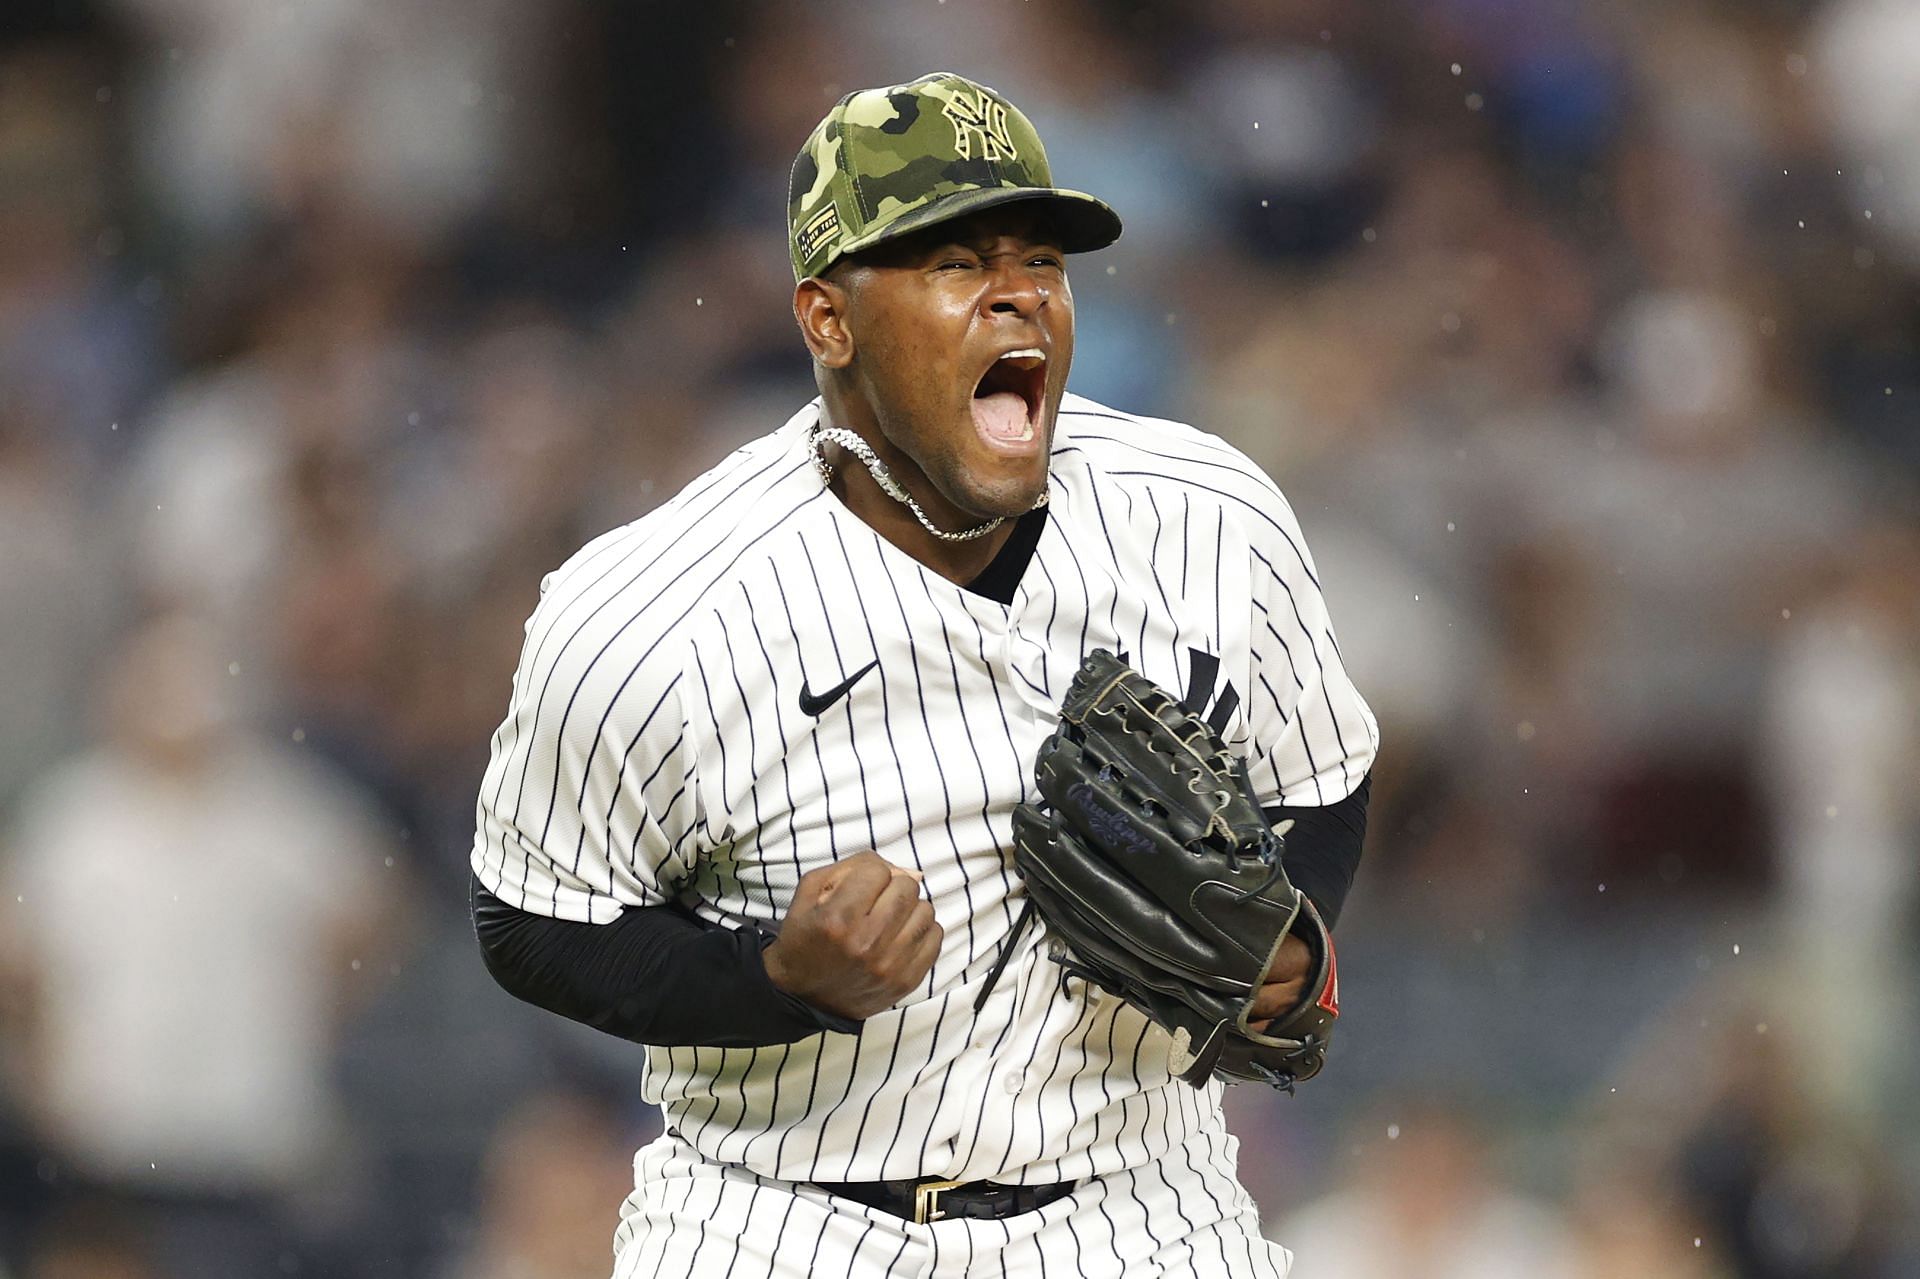 Luis Severino #40 of the New York Yankees reacts after pitching during the fifth inning of Game Two of a doubleheader against the Chicago White Sox at Yankee Stadium on May 22, 2022 in the Bronx borough of New York City.